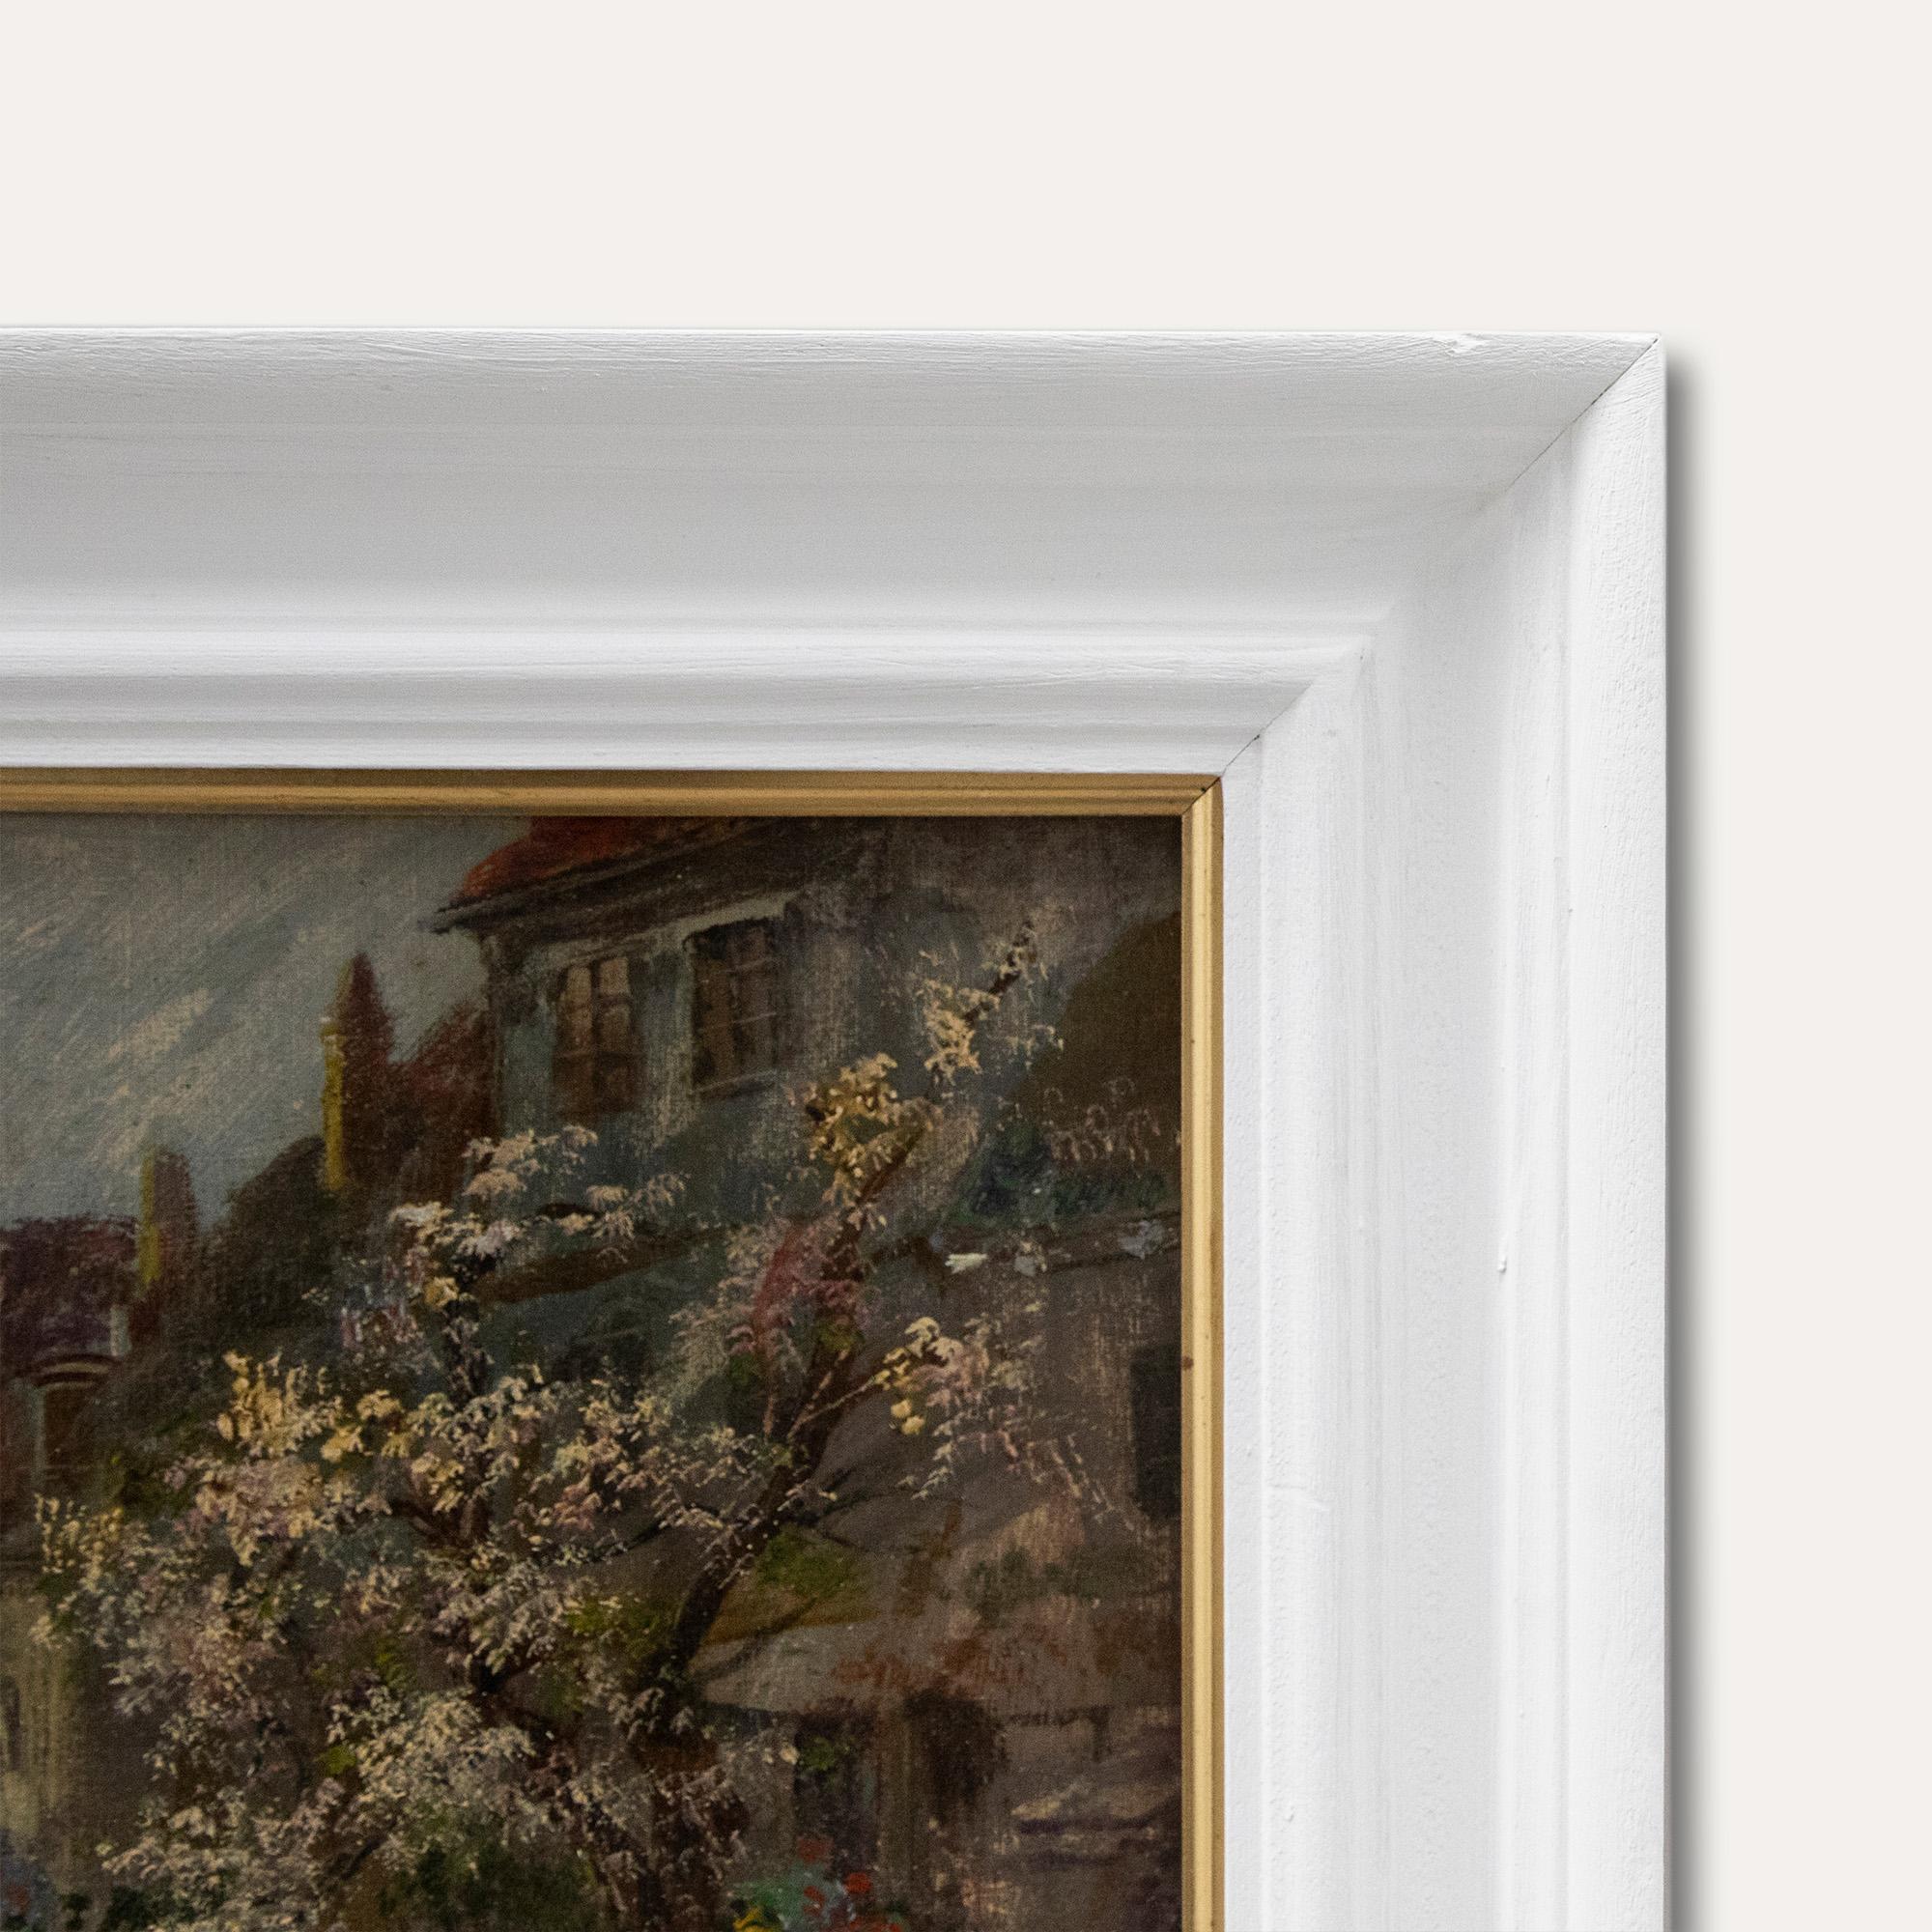 A charming depiction of a quiet town square with cherry tree in blossom and chickens scratching in the foreground. Well-presented in a white wooden frame with a fine gilt window. Signed to the lower left. On canvas on stretchers.